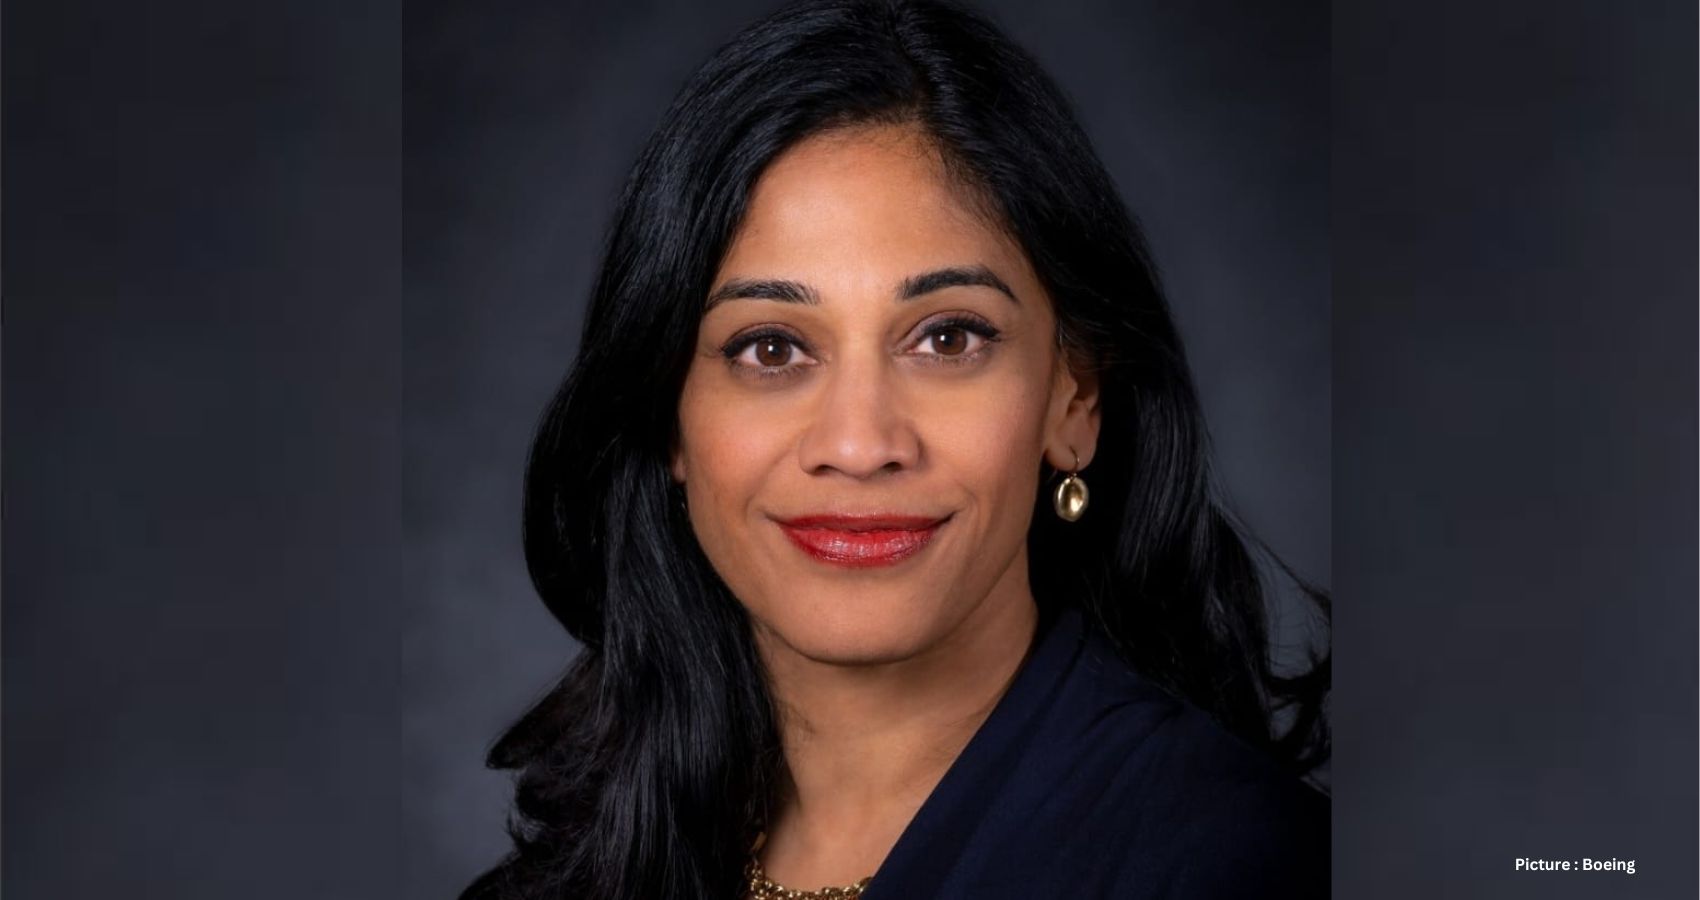 Boeing Appoints Uma Amuluru as Chief Human Resources Officer and Executive VP